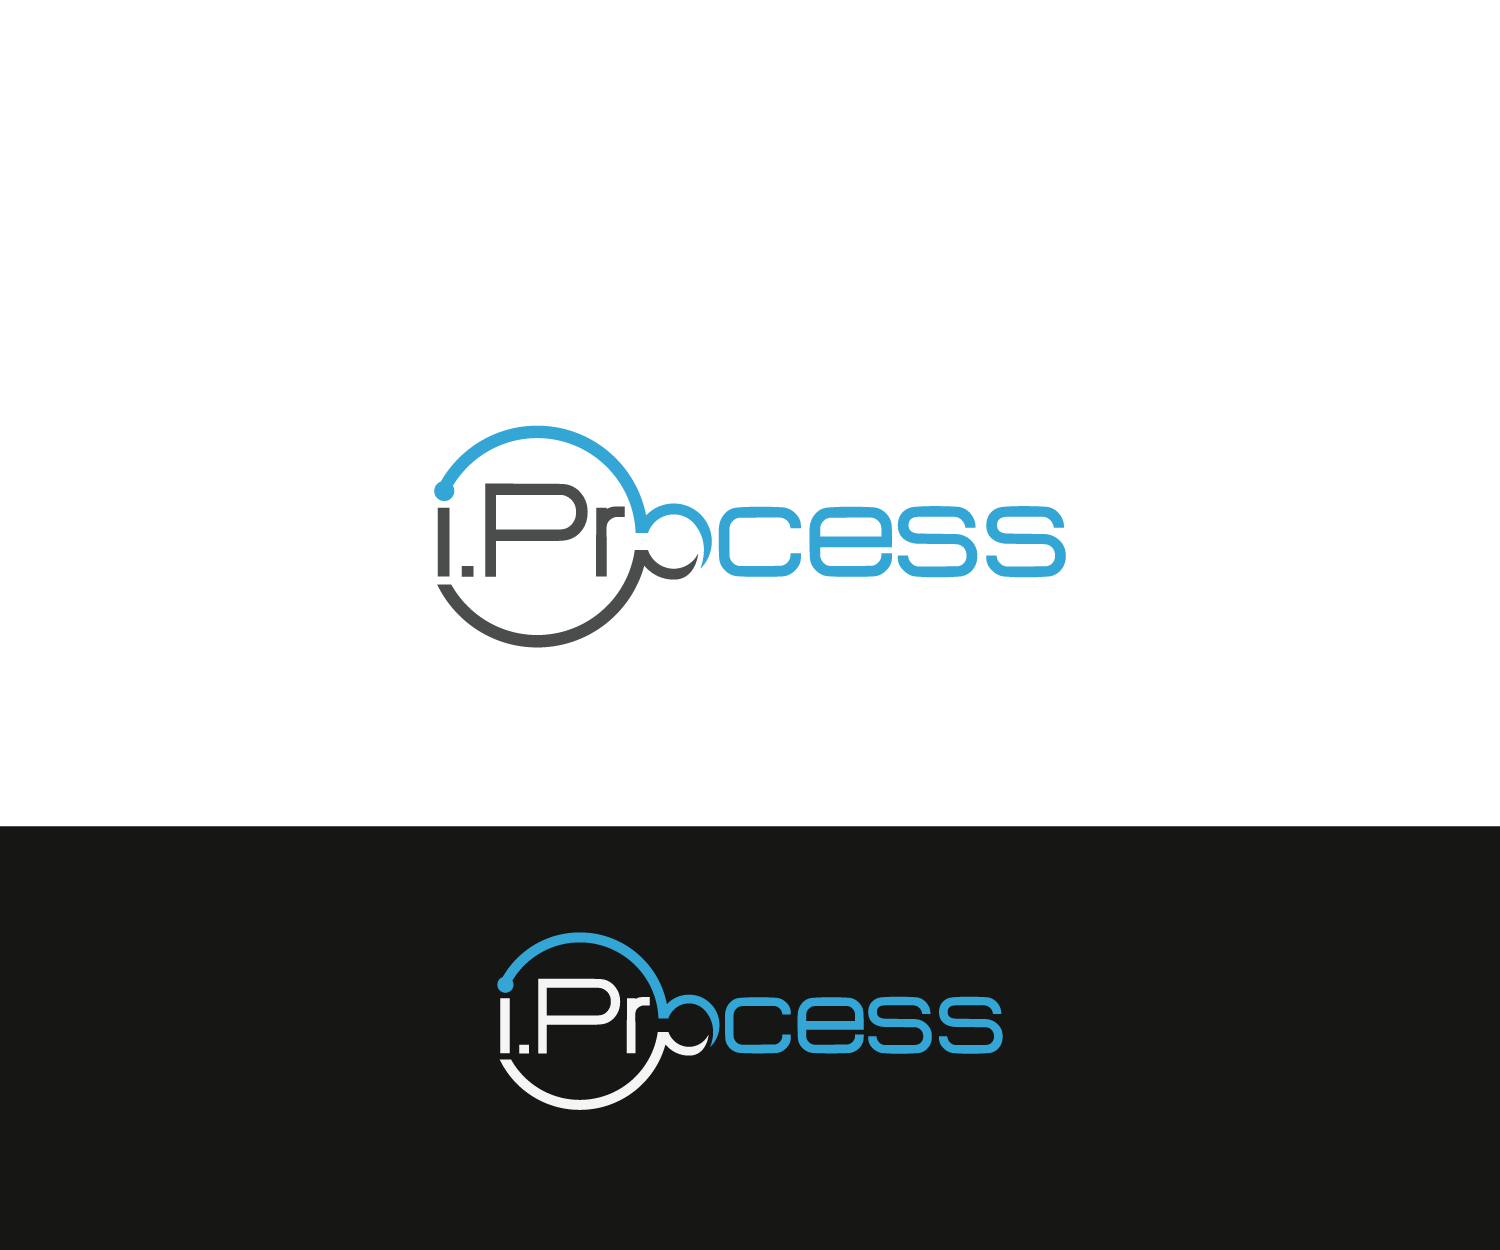 Process Logo - i.Process Logo - for Shield Watch IT Services | 29 Logo Designs for ...